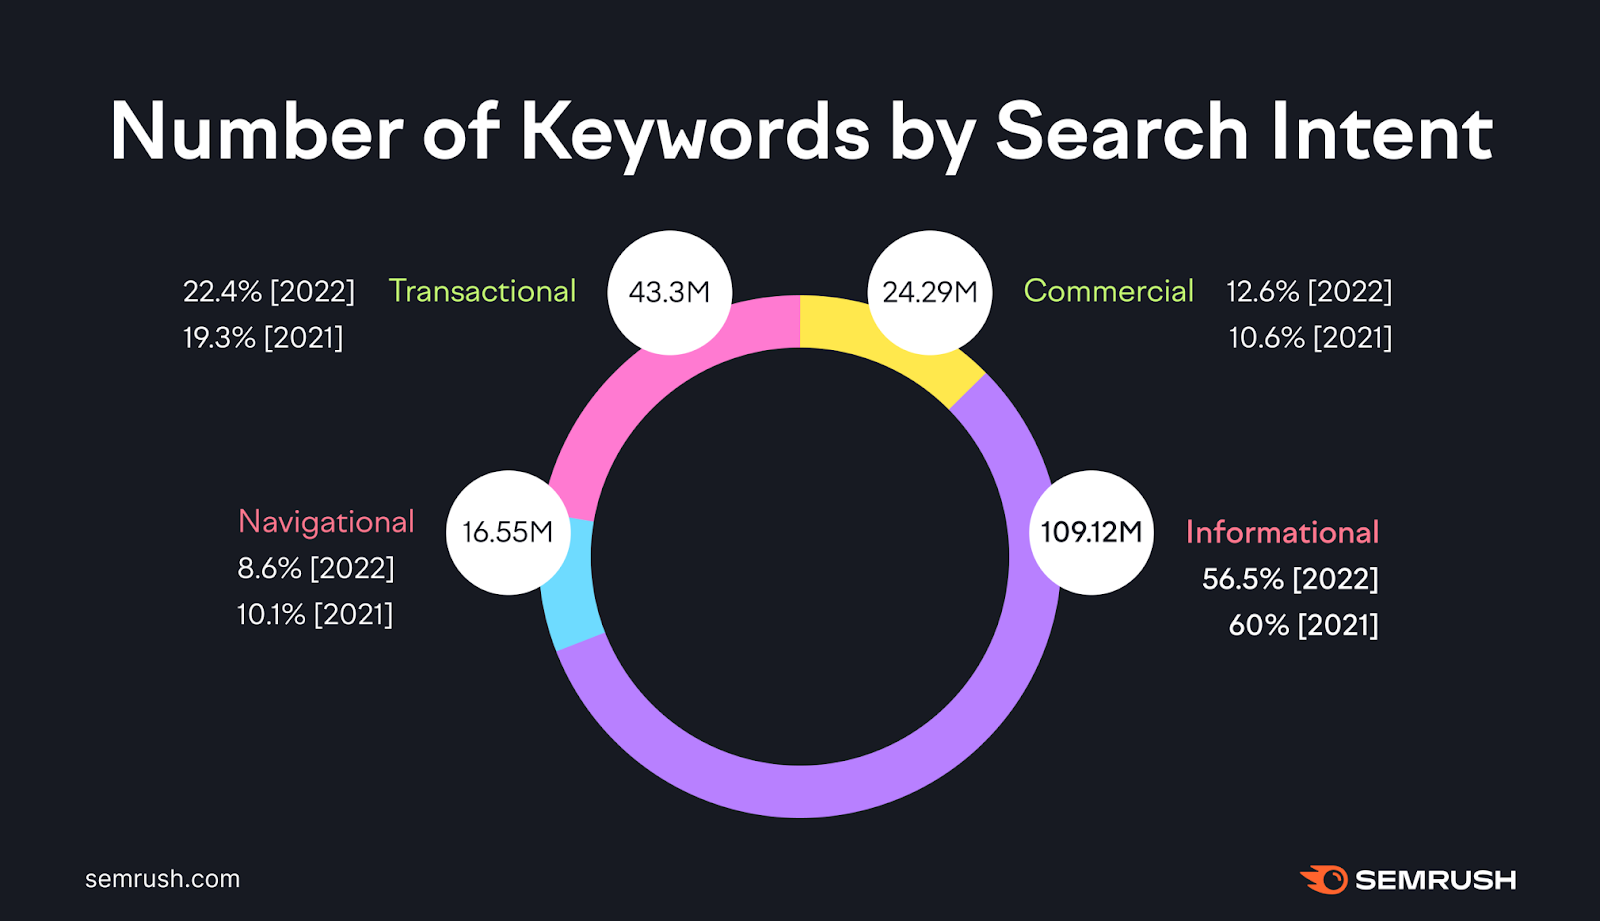 an image showing number of keywords by search intent, navigational (16.55M keywords), transactional (43.3M), commercial (24.29M) and informational (109.12M)